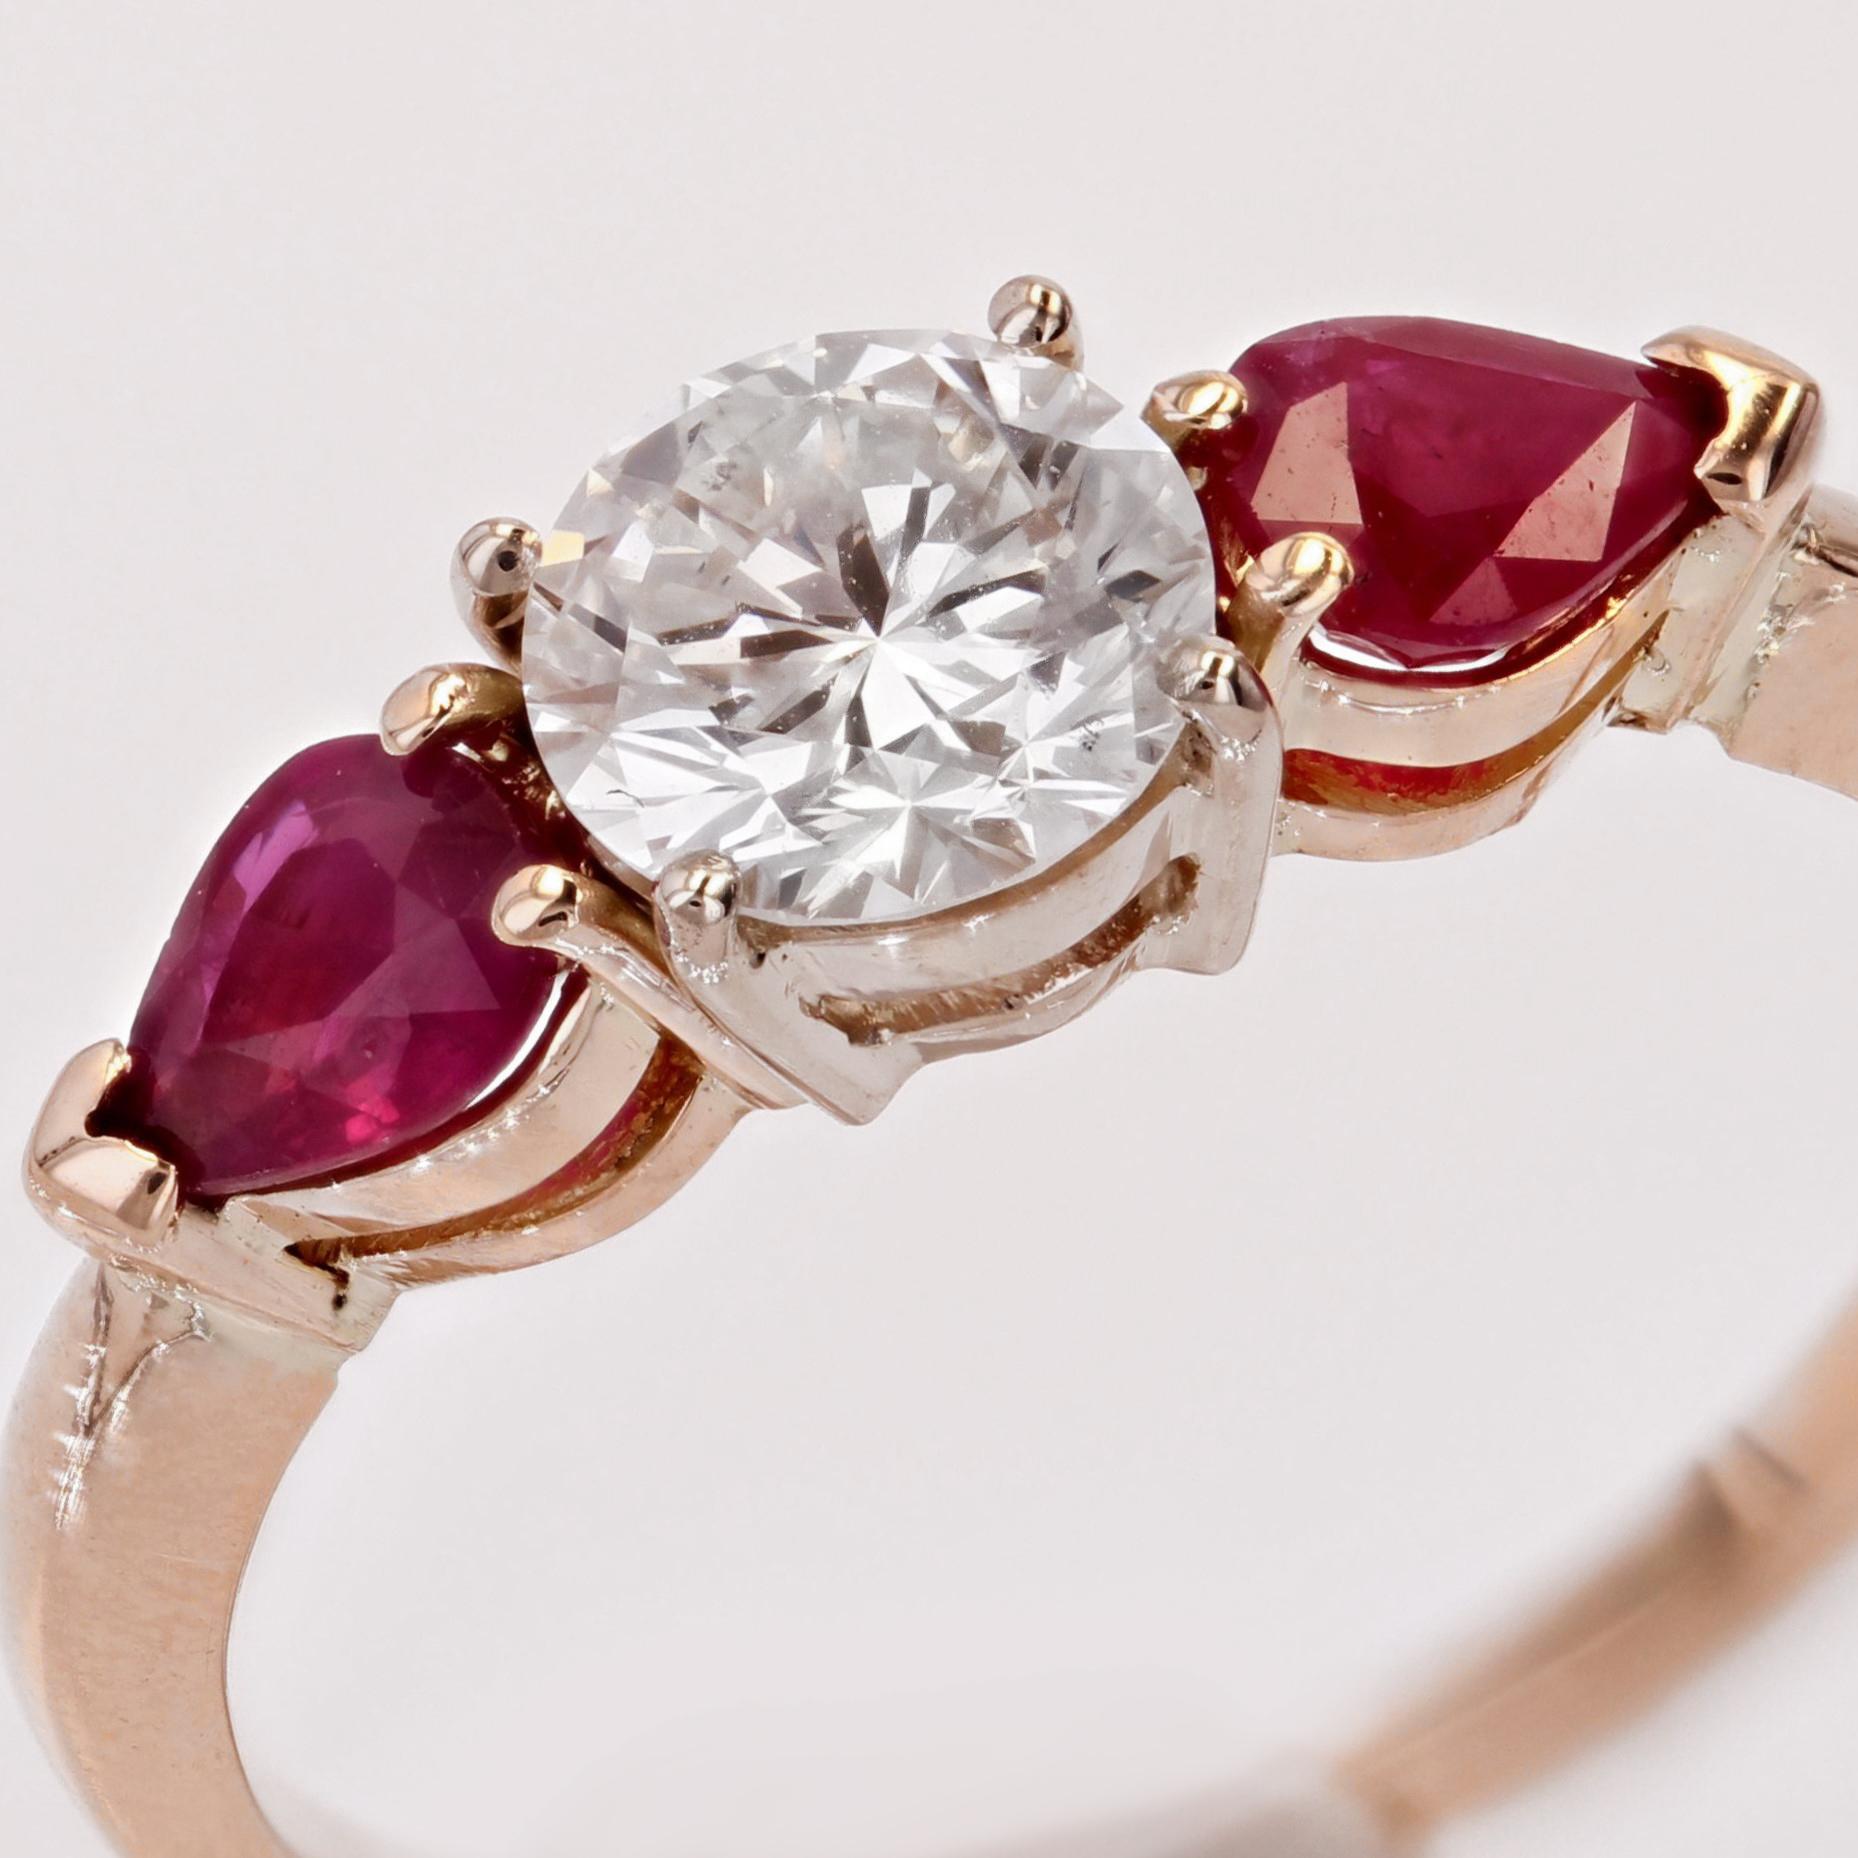 Baume Creation Rubies E.VVS Diamond Yellow Gold Trilogy Ring For Sale 2